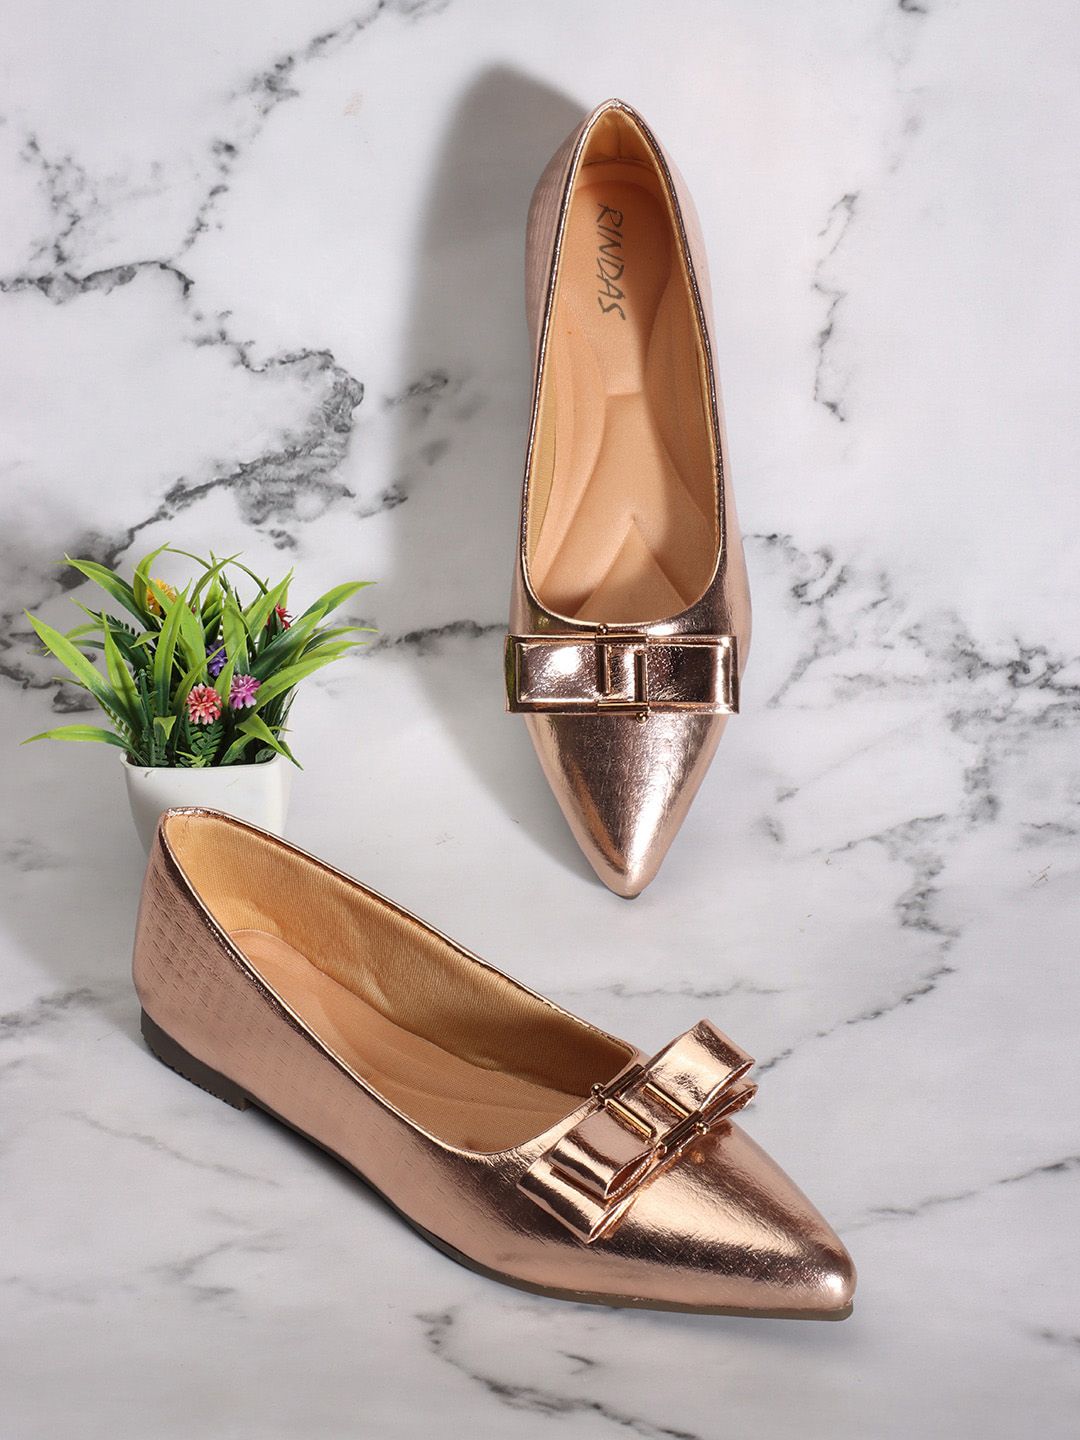 RINDAS Women Copper-Toned Colourblocked Party Ballerinas with Bows Flats Price in India